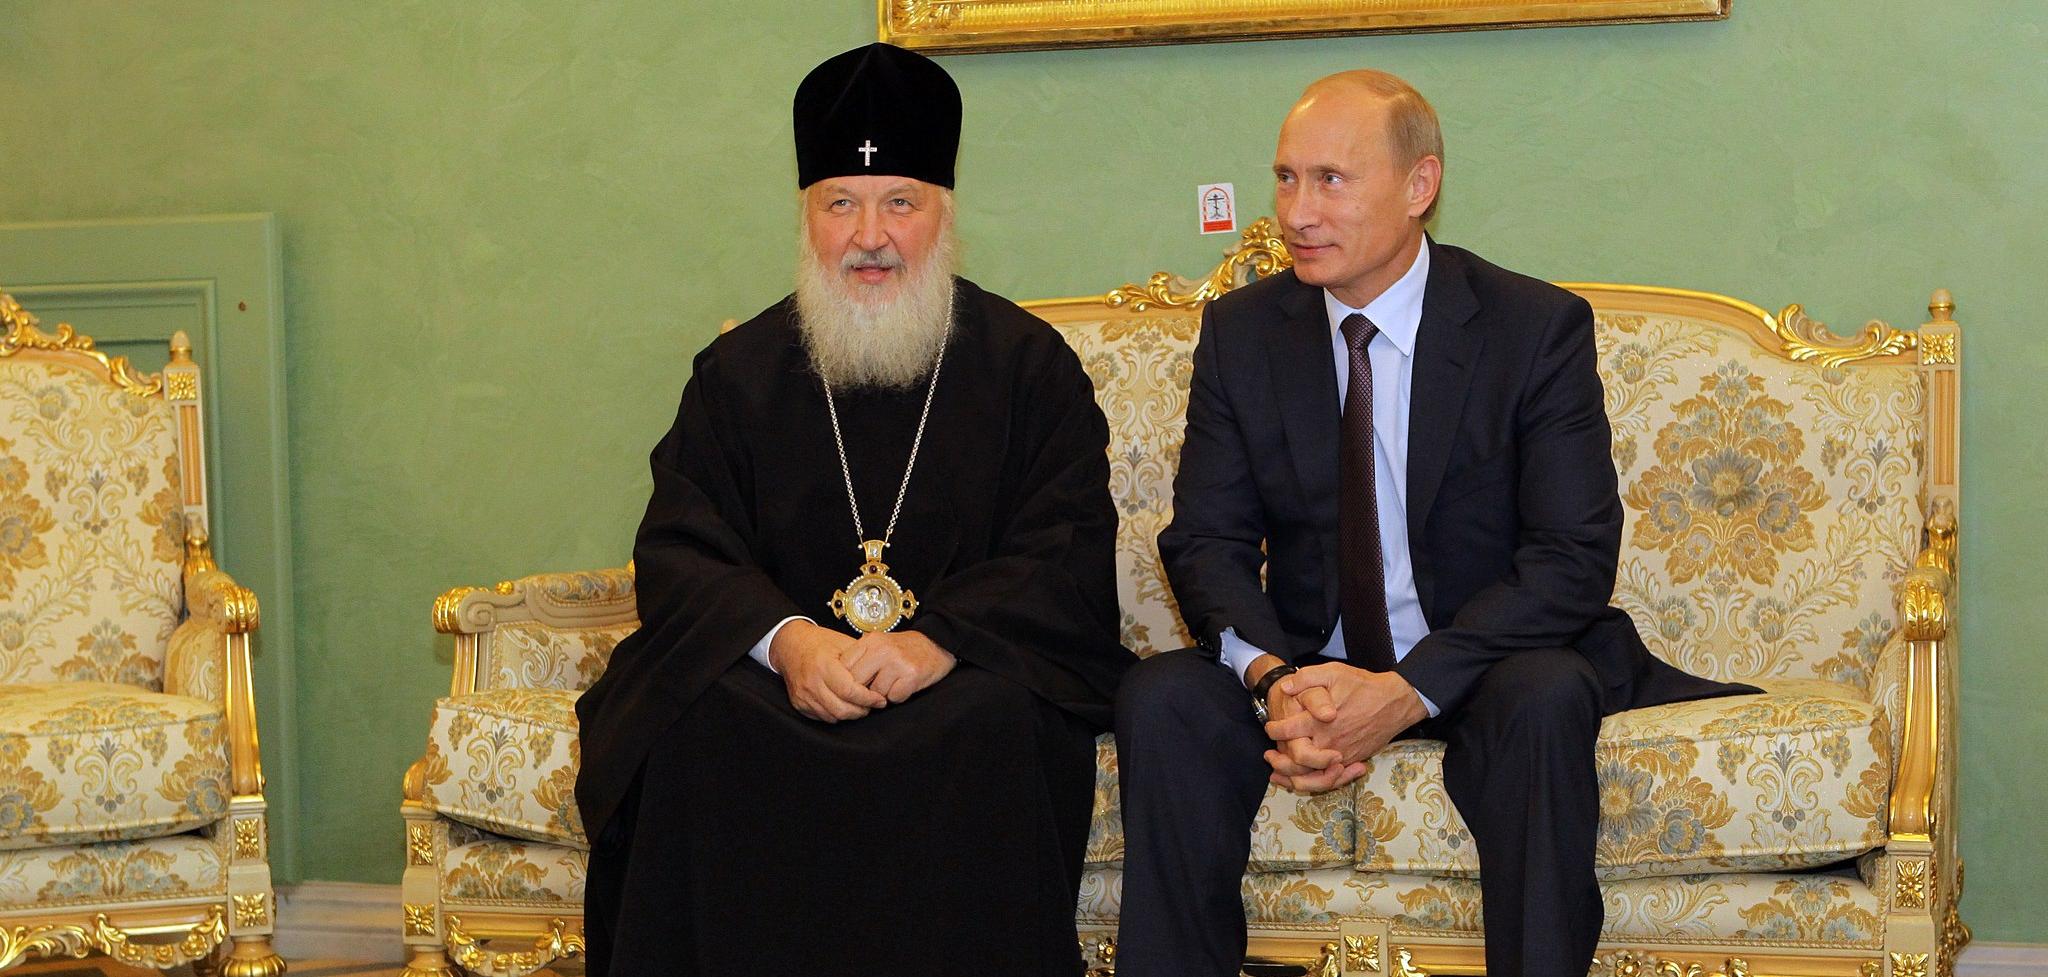 A man in a black robe and a black hate with a cross on it sitting next to Vladimir Putin on a golden couch.